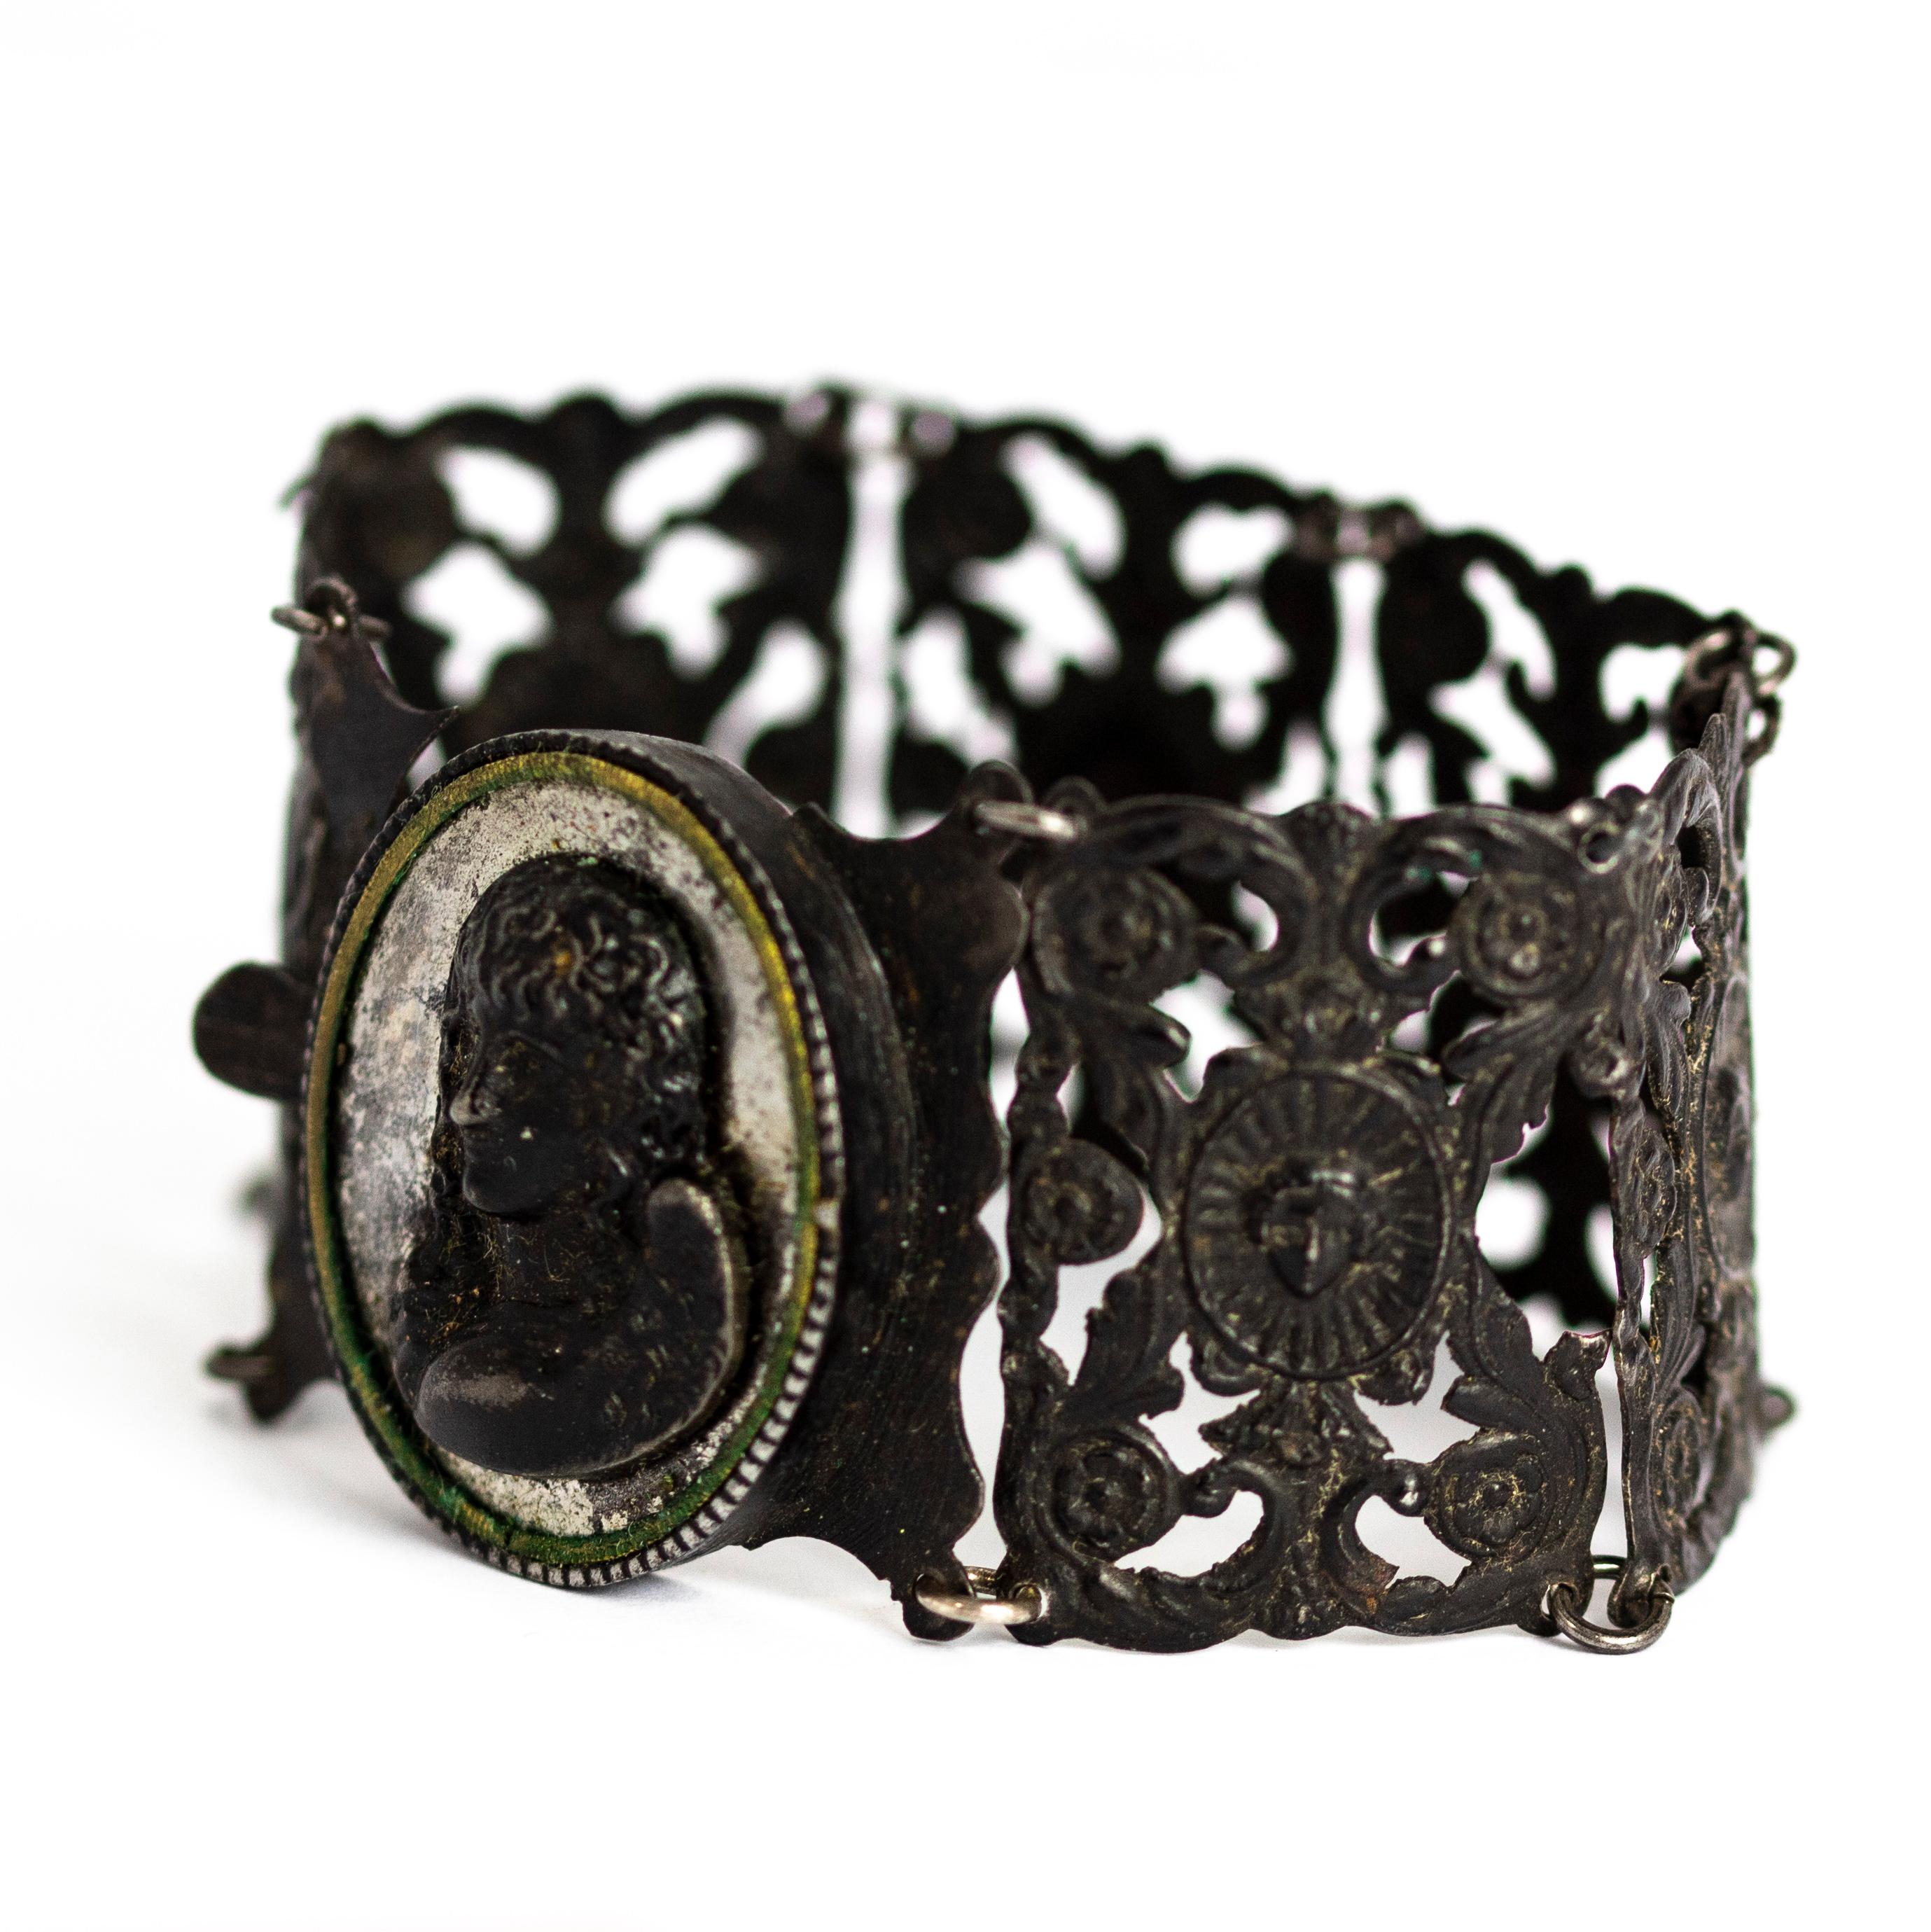 This intricate Victorian cuff bracelet is made of Berlin iron work. It is made up of 7 finely cast panels with flower and small detailed portraits, one of which has a large portrait of an angel held in an ornate oval frame. 

Length: 7 inches